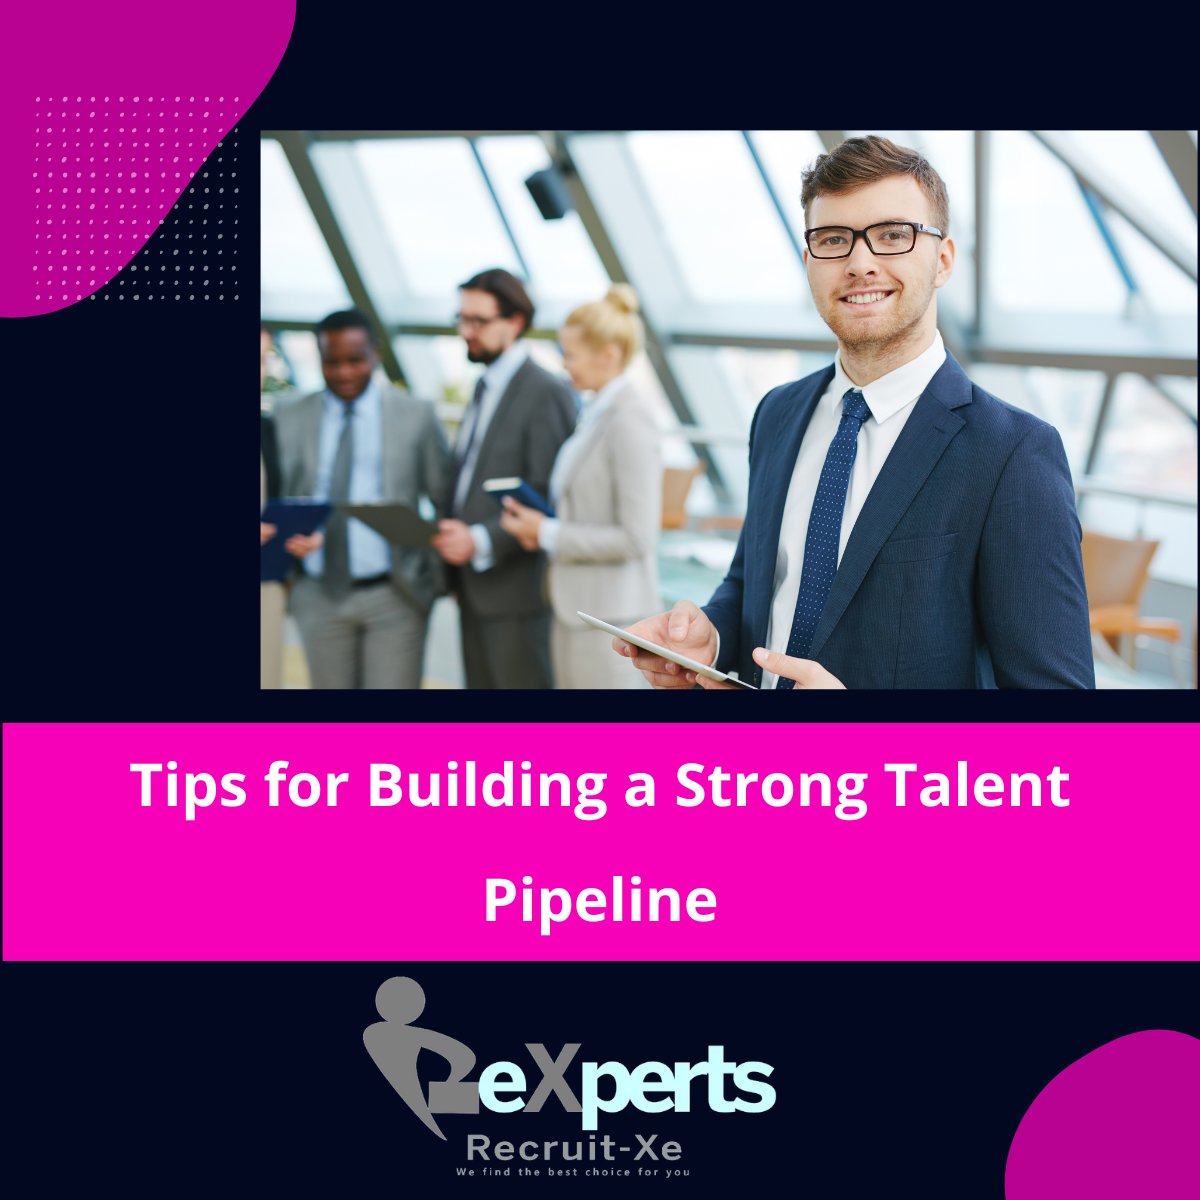 Your employer brand is how you present your company to potential candidates. Make sure your website and social media presence are up-to-date and accurately reflect your company culture and values. #talentpipeline #employeerecruitment #hiring